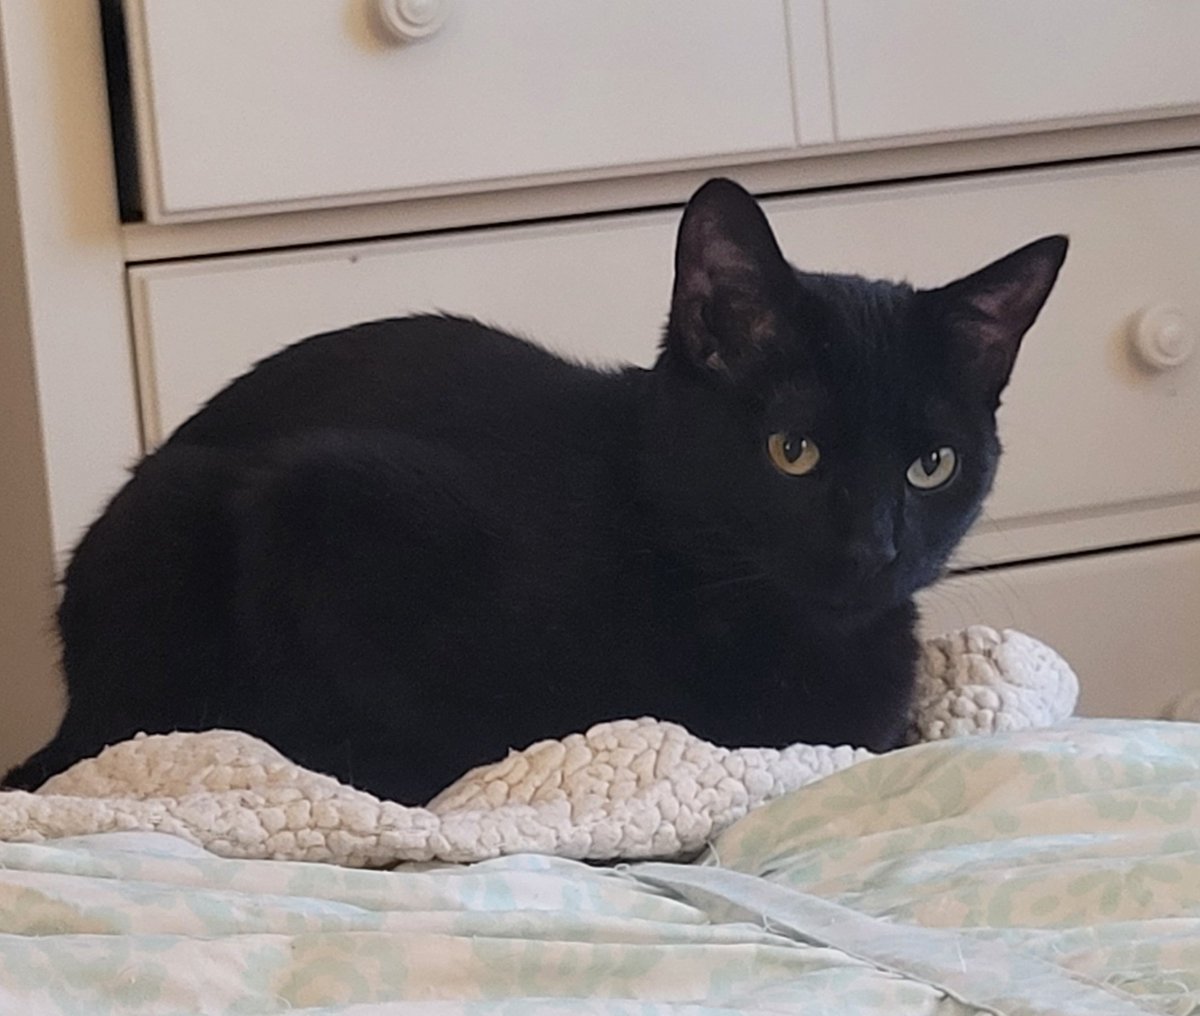 If you hear of anyone looking to adopt a cat, please mention Star? Still trying to get her a home! #fosterkittens #blackcats #blackcatsofinstagram #blackcatsrule #meowsofcanada #catsofinstagram #canadiancats #adoptdontshop #ninthlifecatrescue #petsmartcharities #petsmart